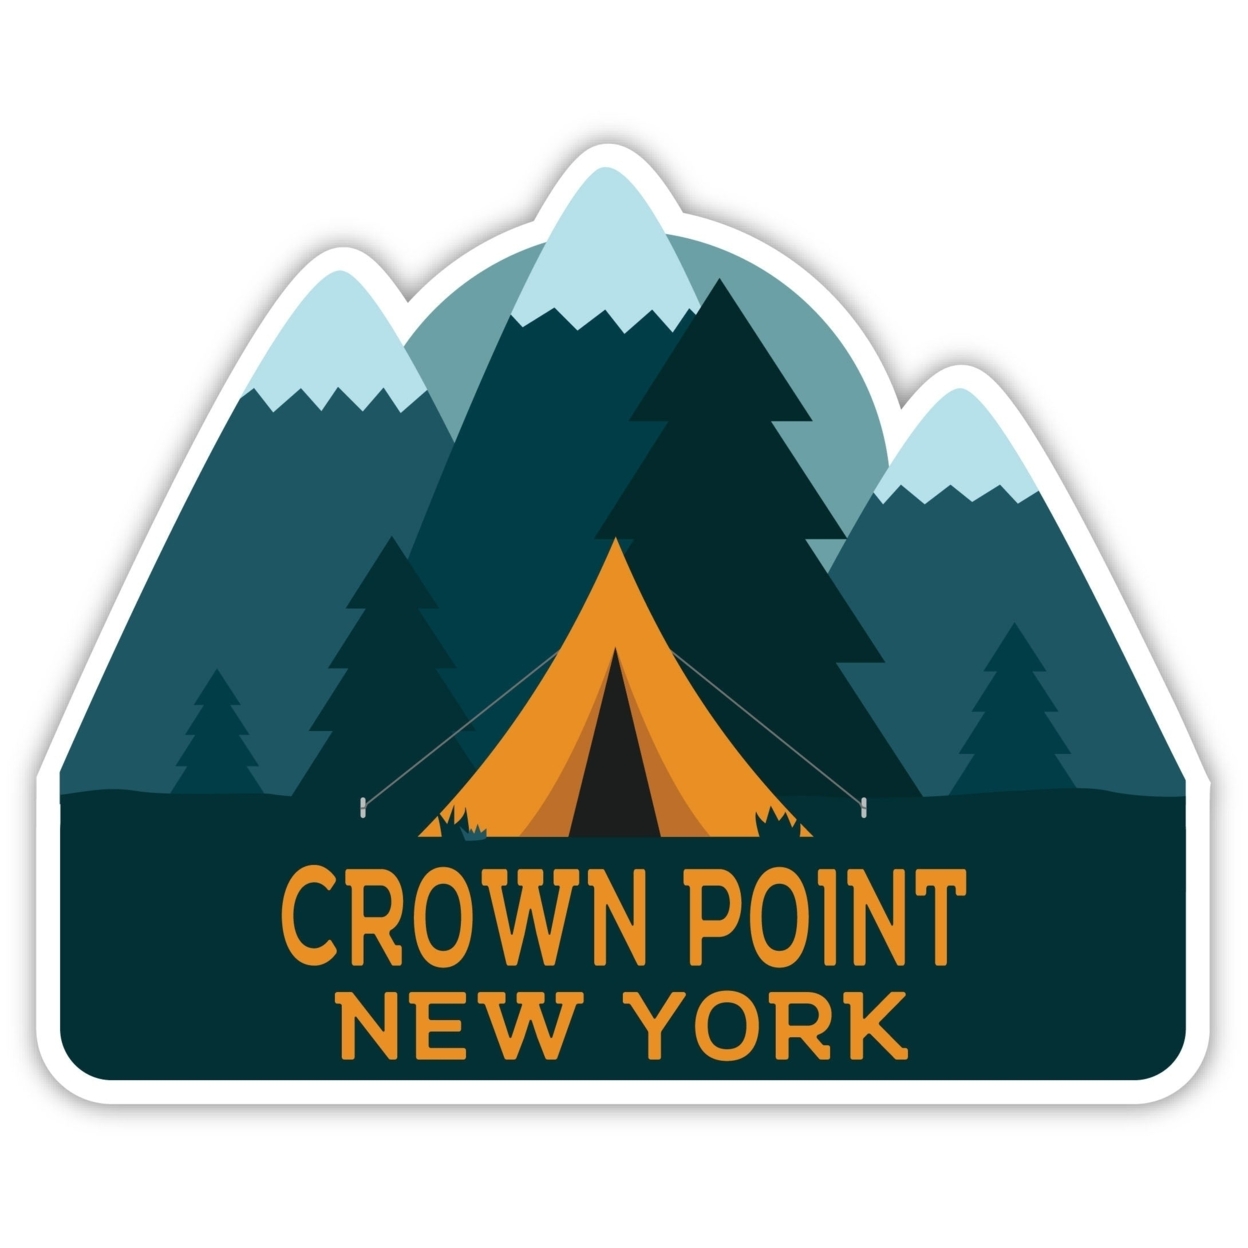 Crown Point New York Souvenir Decorative Stickers (Choose Theme And Size) - 4-Pack, 2-Inch, Tent